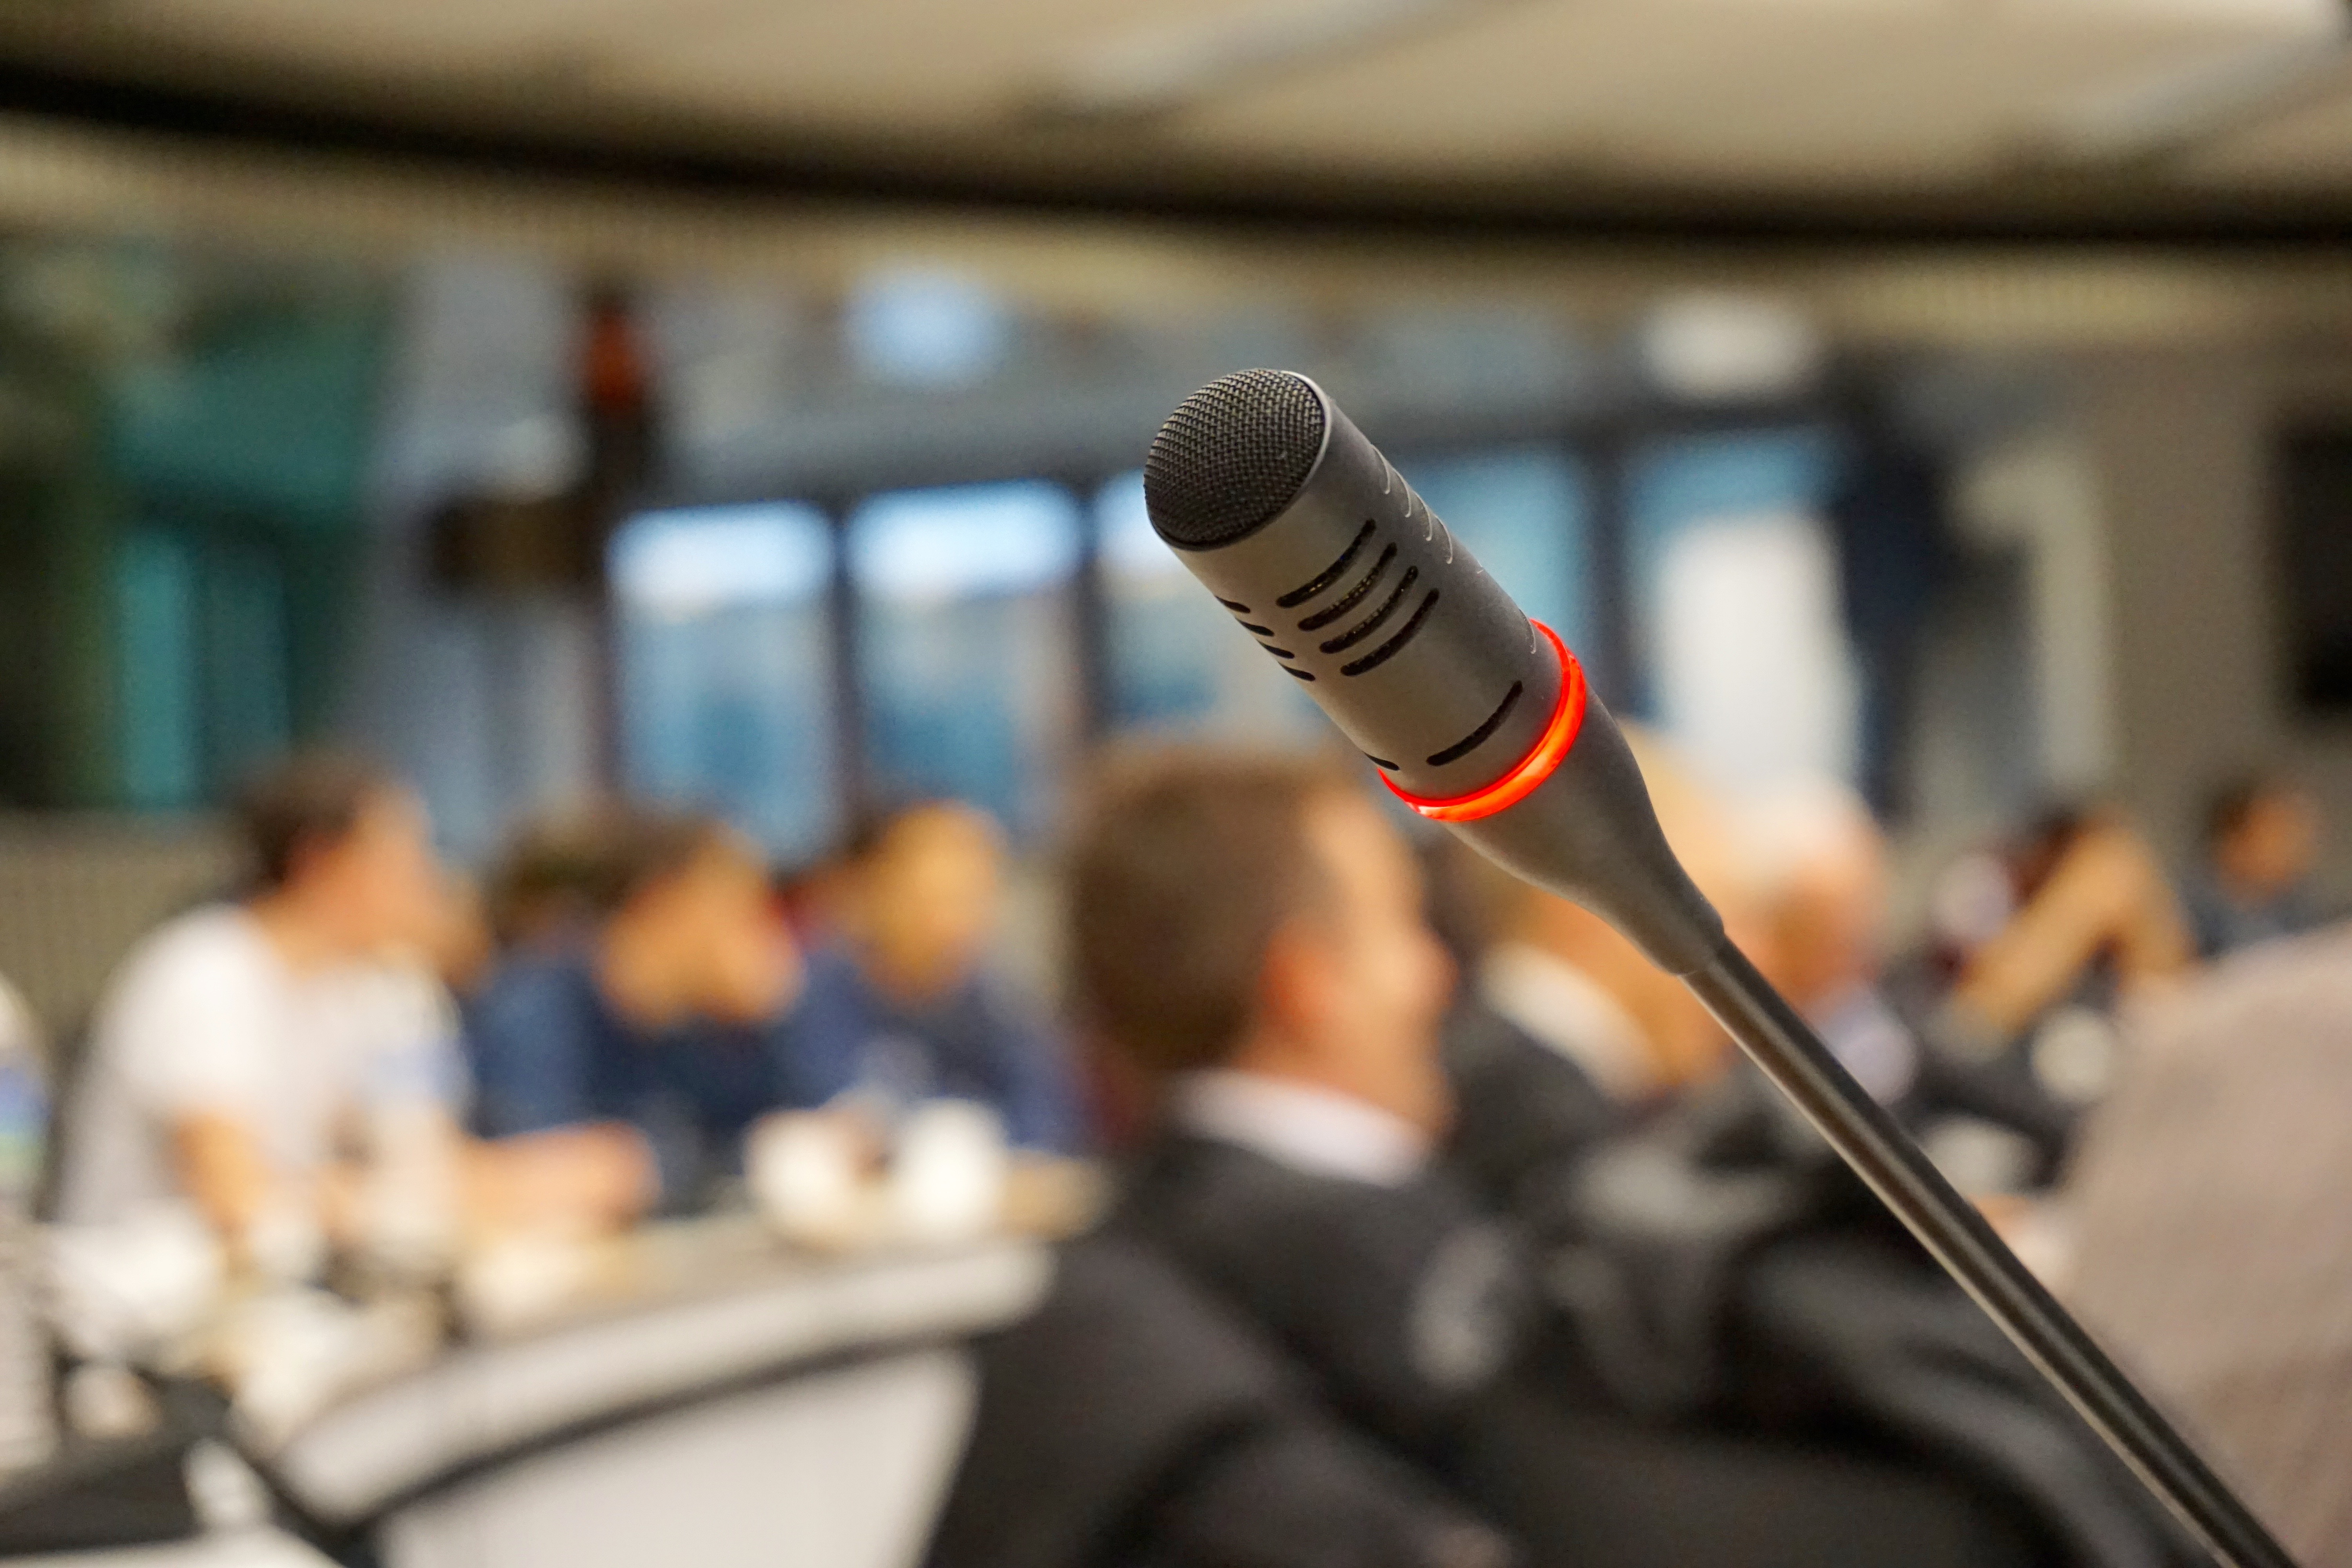 Becoming a Better Public Speaker Means Doing This 1 Little Thing Every Day